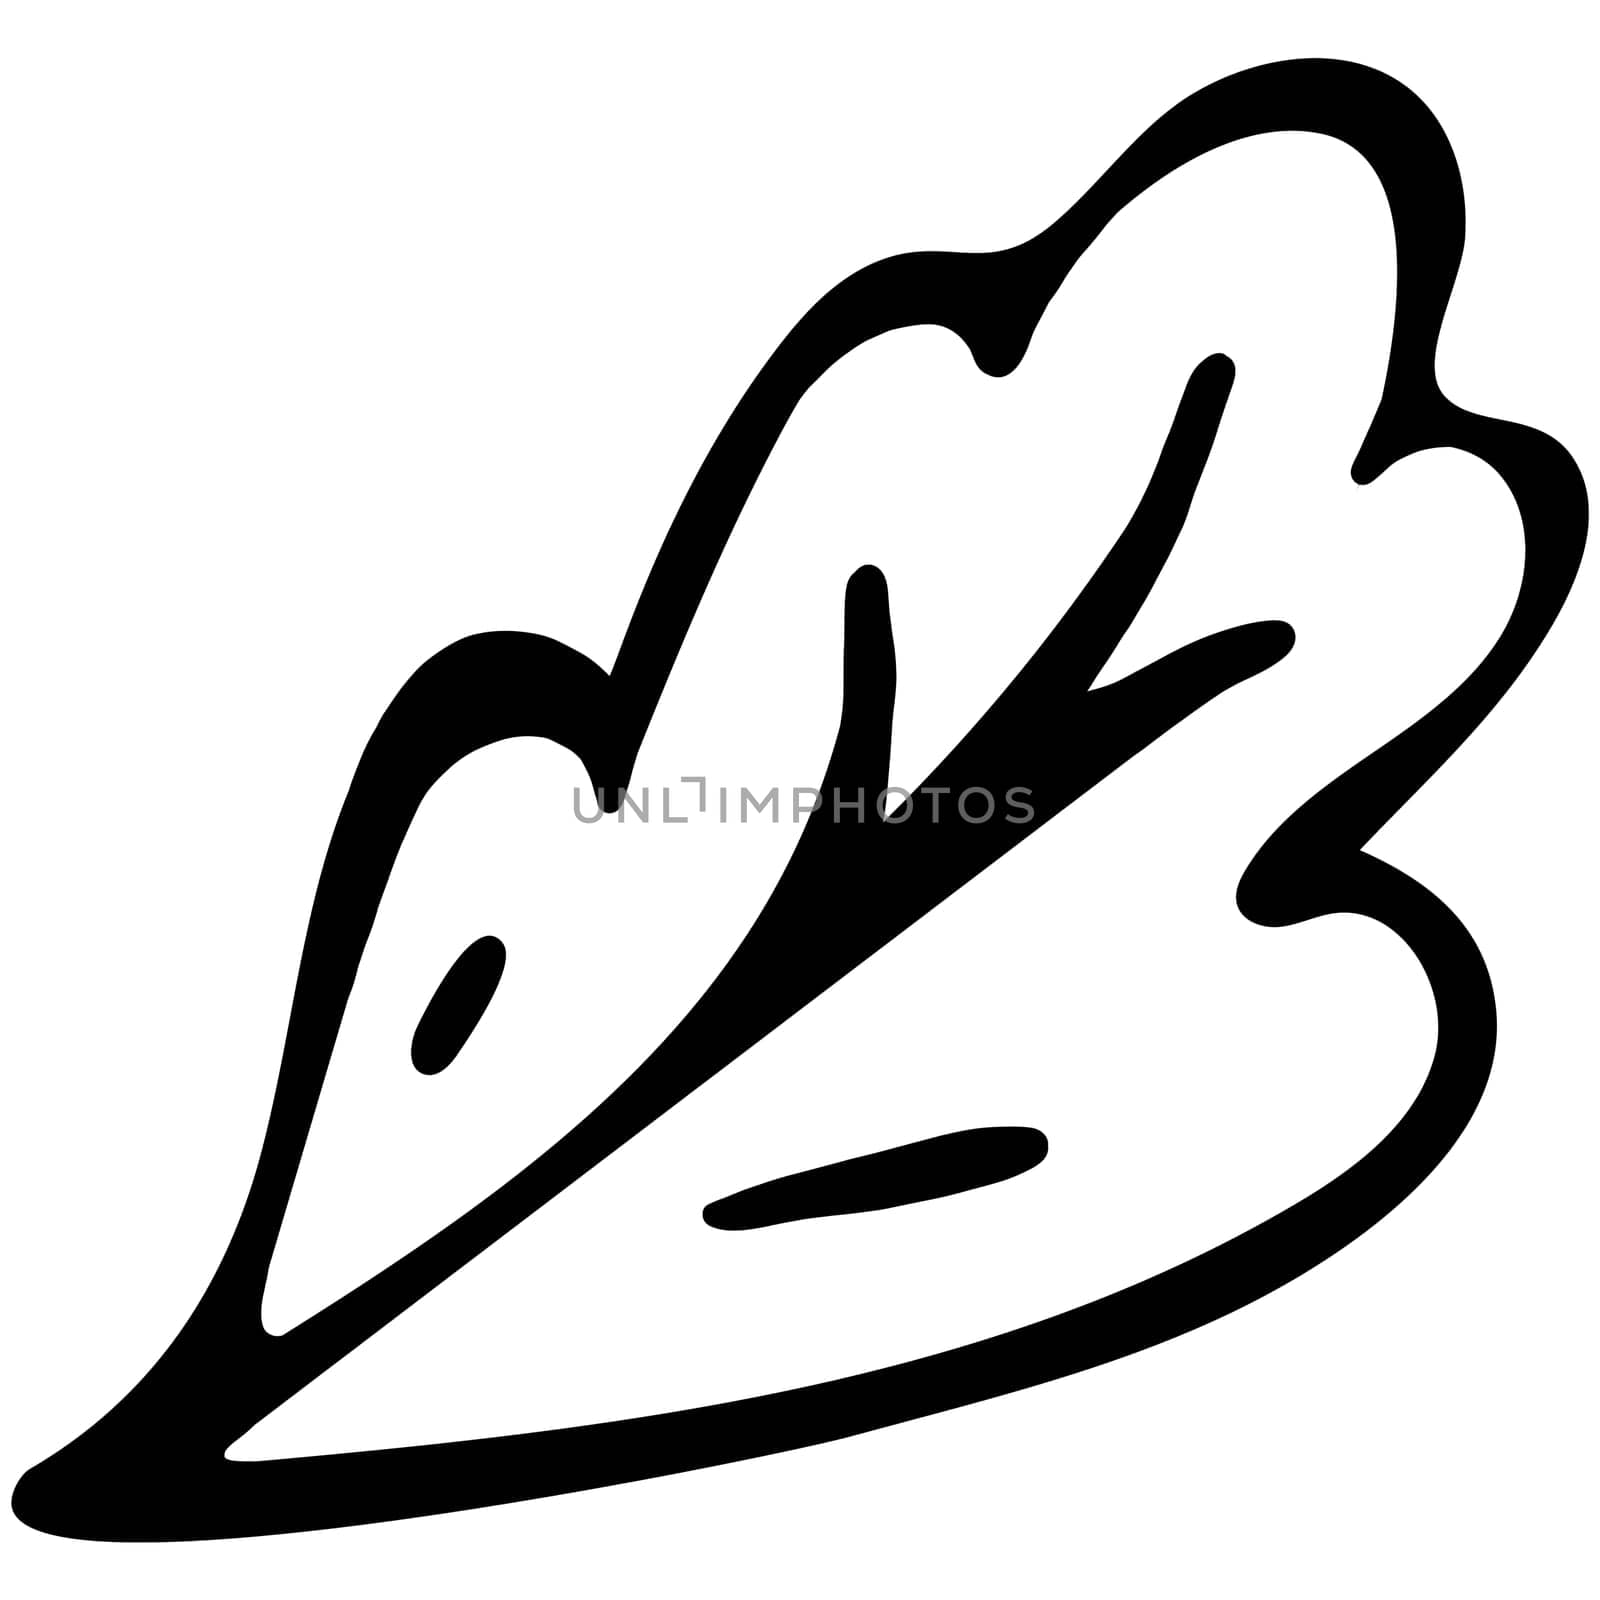 Black and White Hand Drawn Decorative Graphic Flower Leaf. Abstract Leaf Icon for Coloring Page, Book or Sheet for Kids.